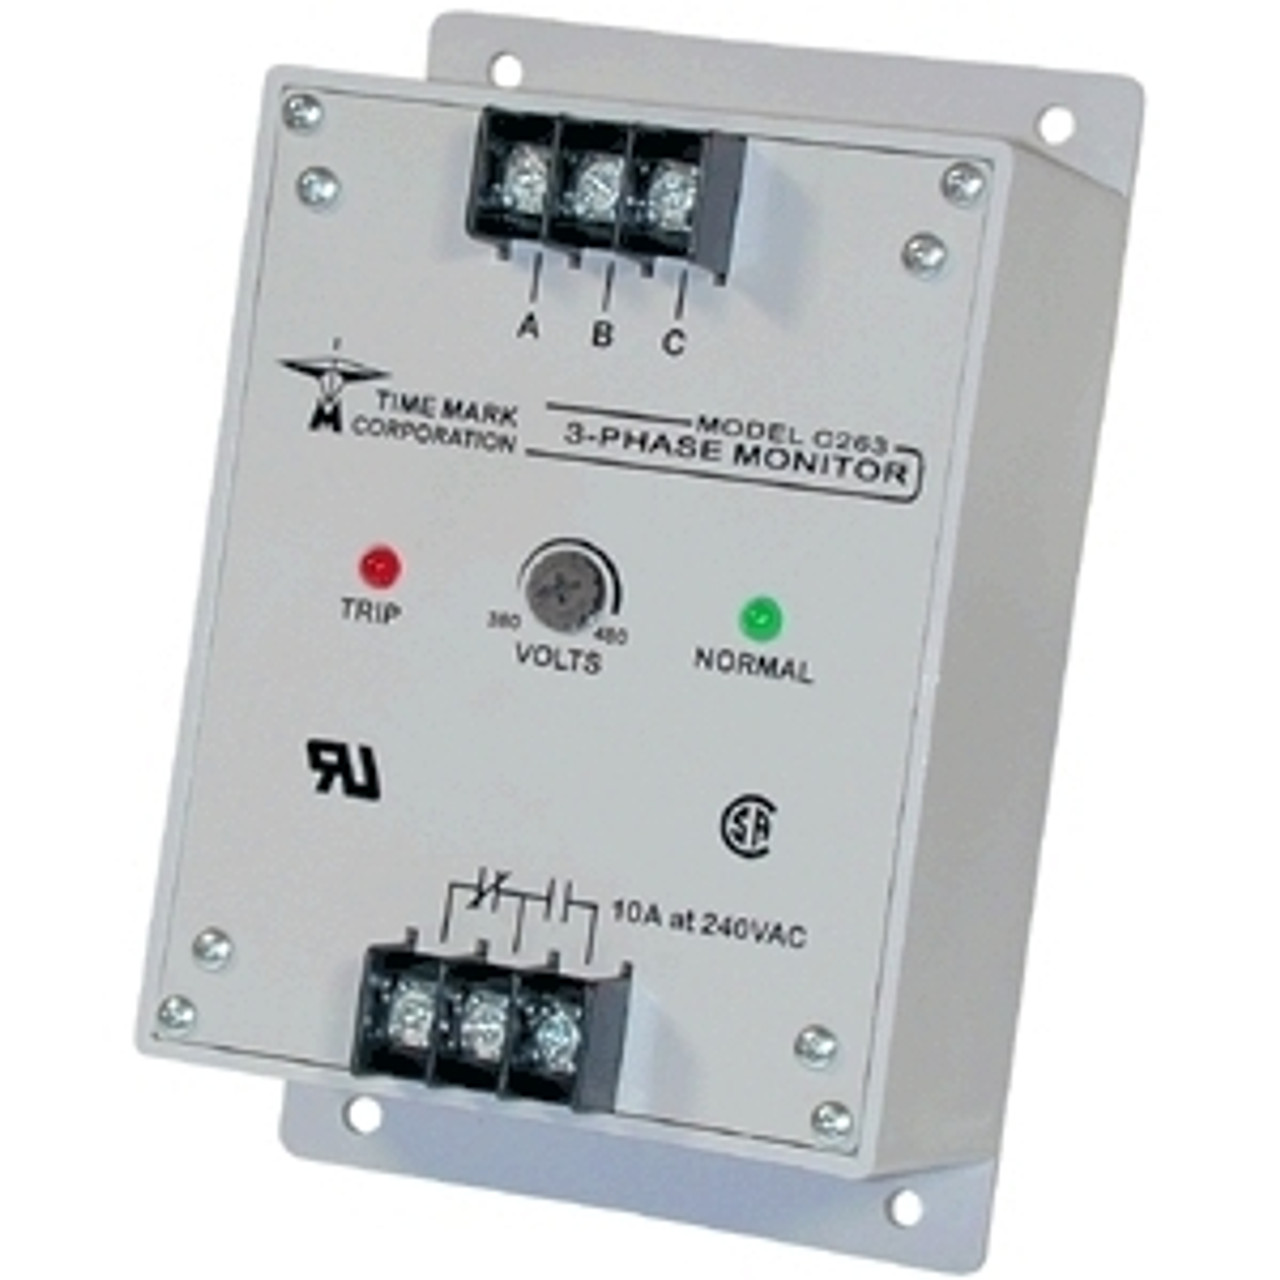 TimeMark D263 Phase Monitor Relays